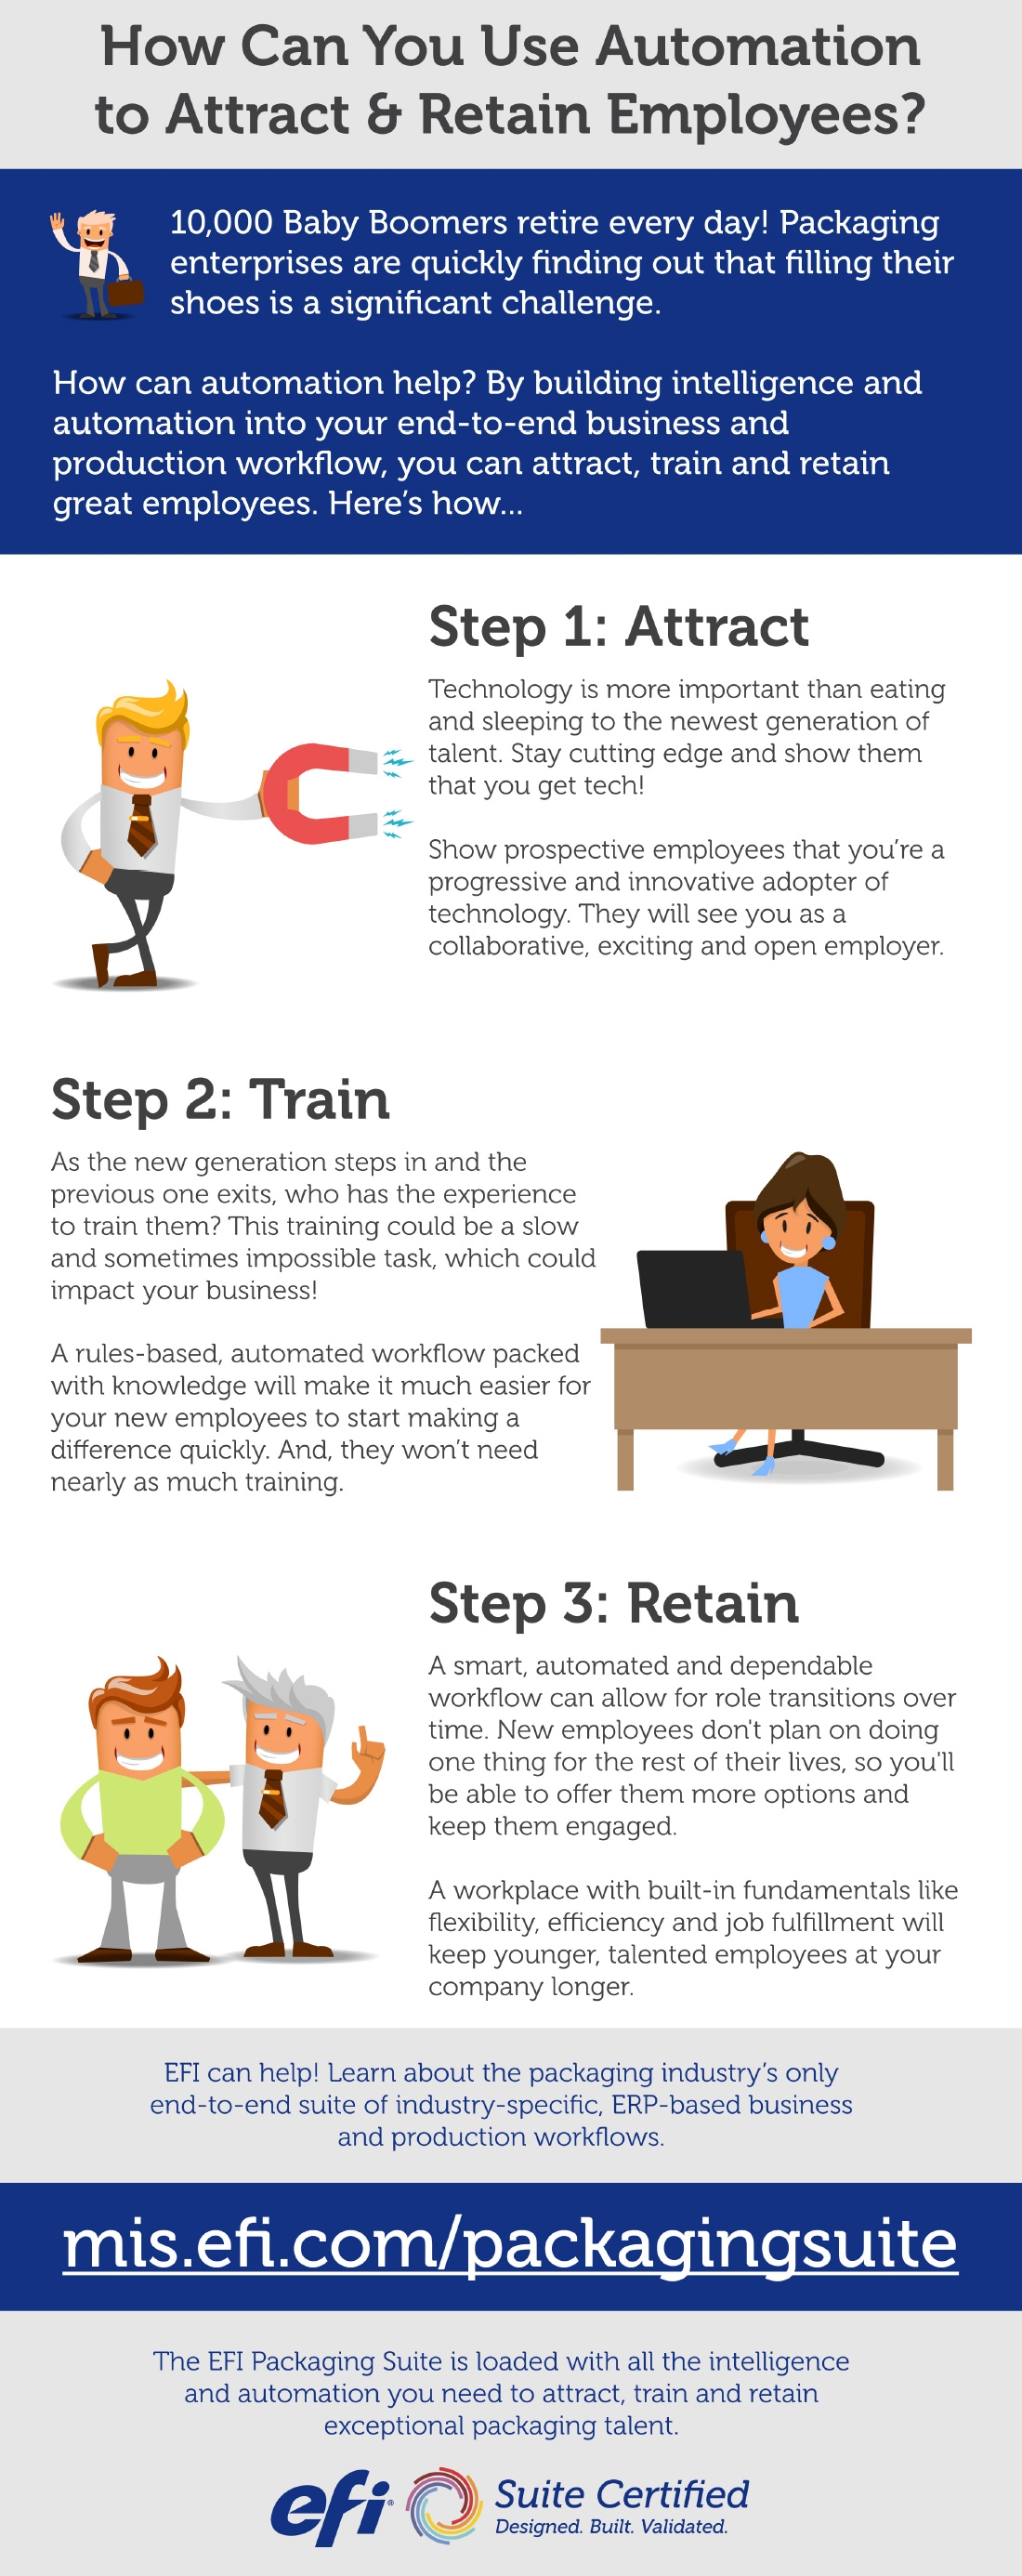 Using automation to attract and retain employees